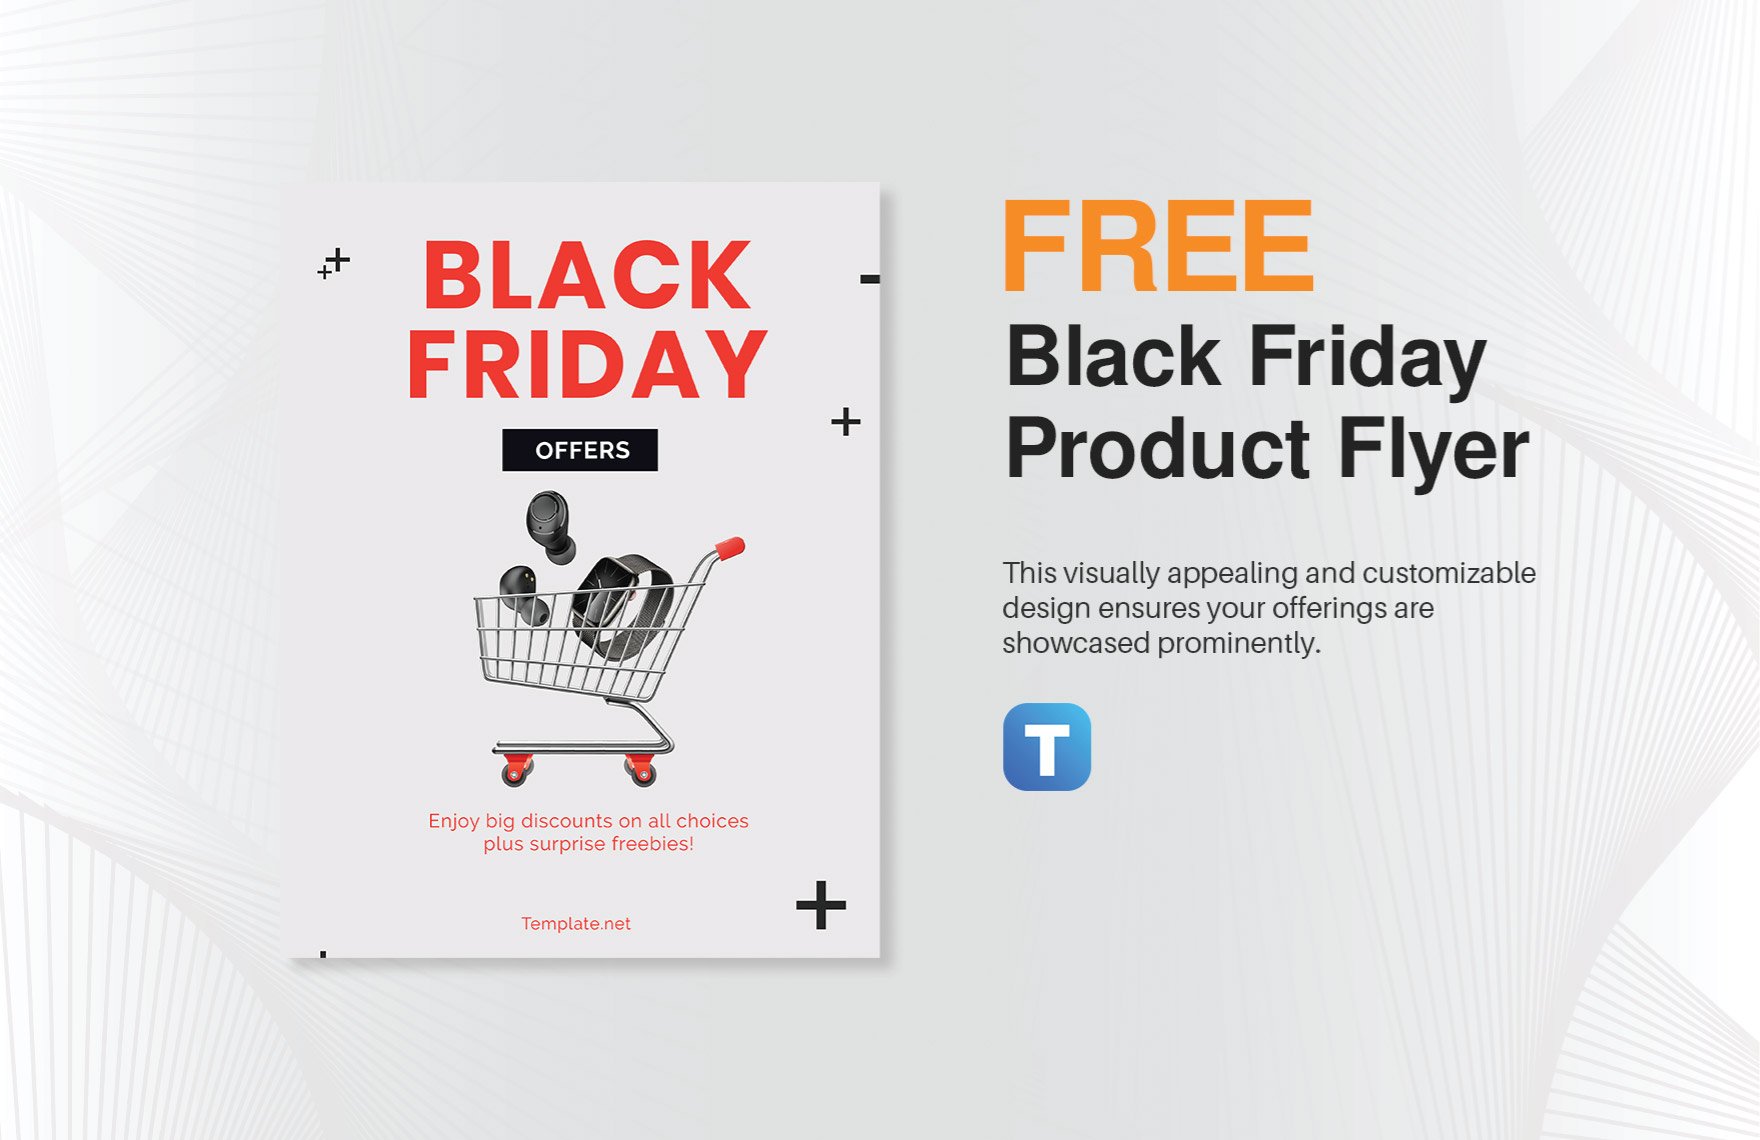 Black Friday Product Flyer